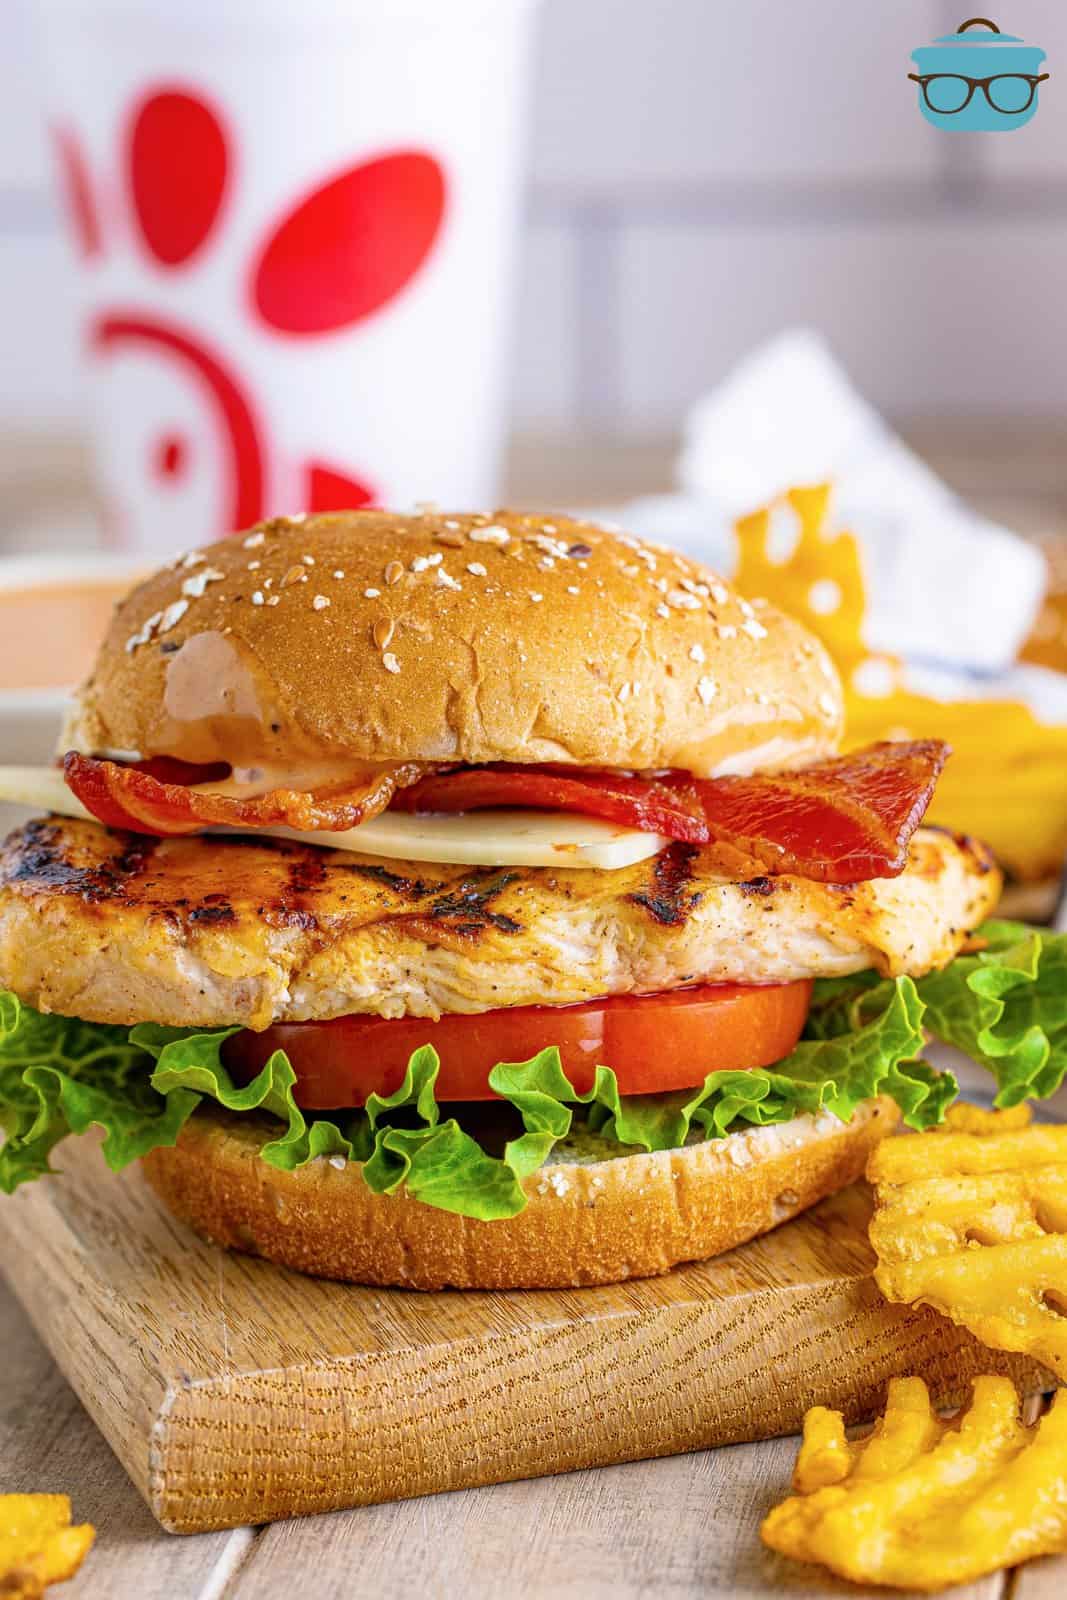 Chick-fil-A Grilled Chicken Club Sandwich on wooden board with waffle fries next to it.